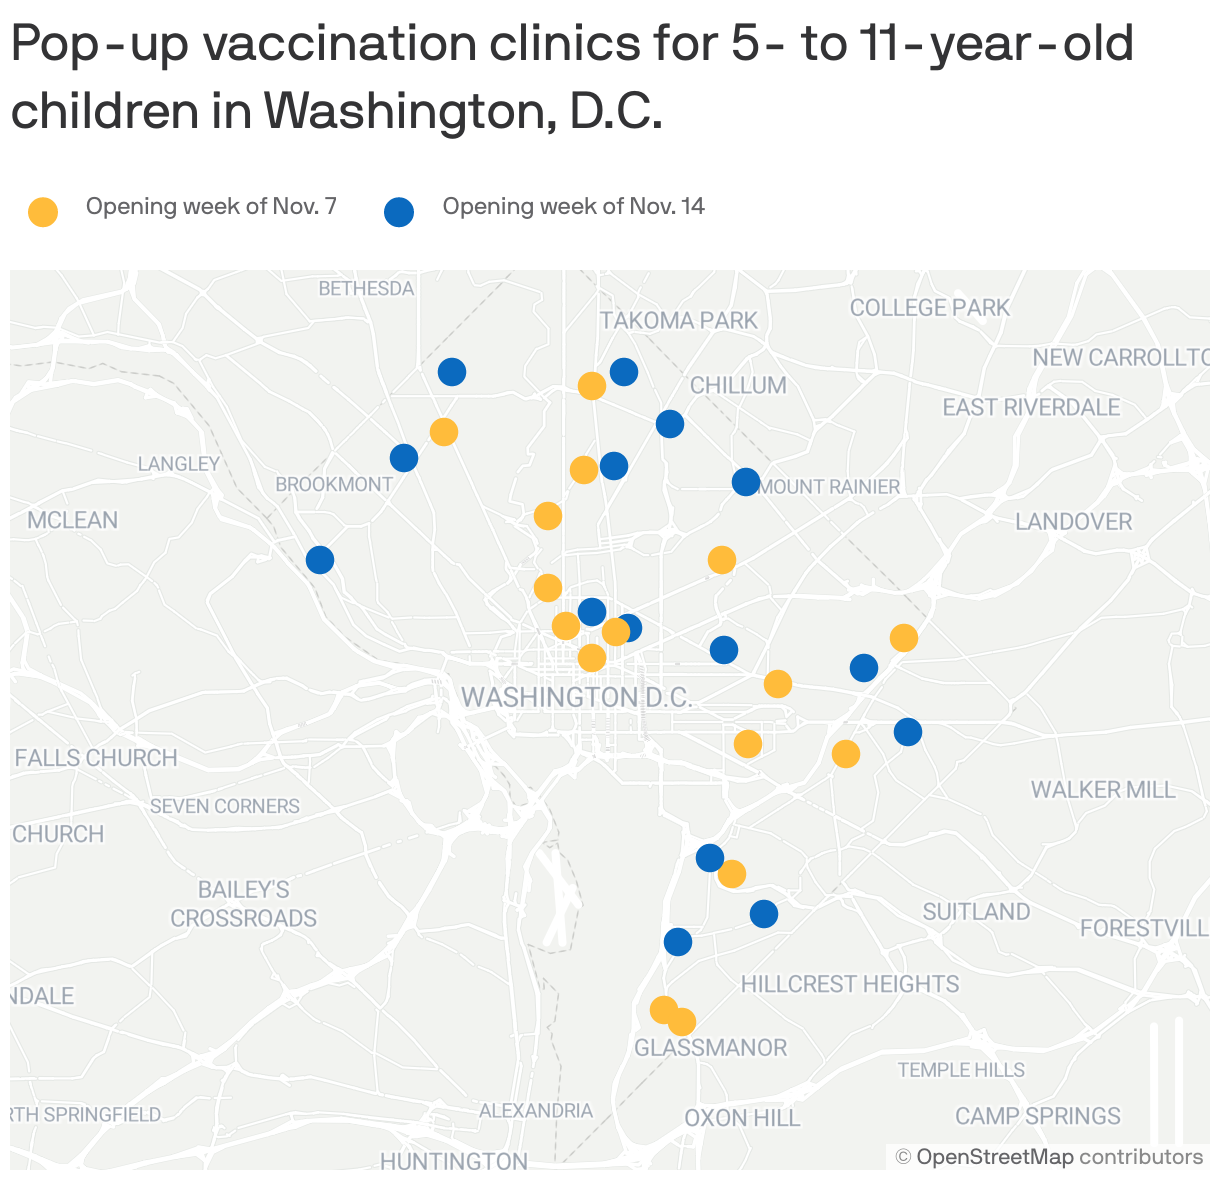 Pop-up vaccination clinics for 5- to 11-year-old children in Washington, D.C.